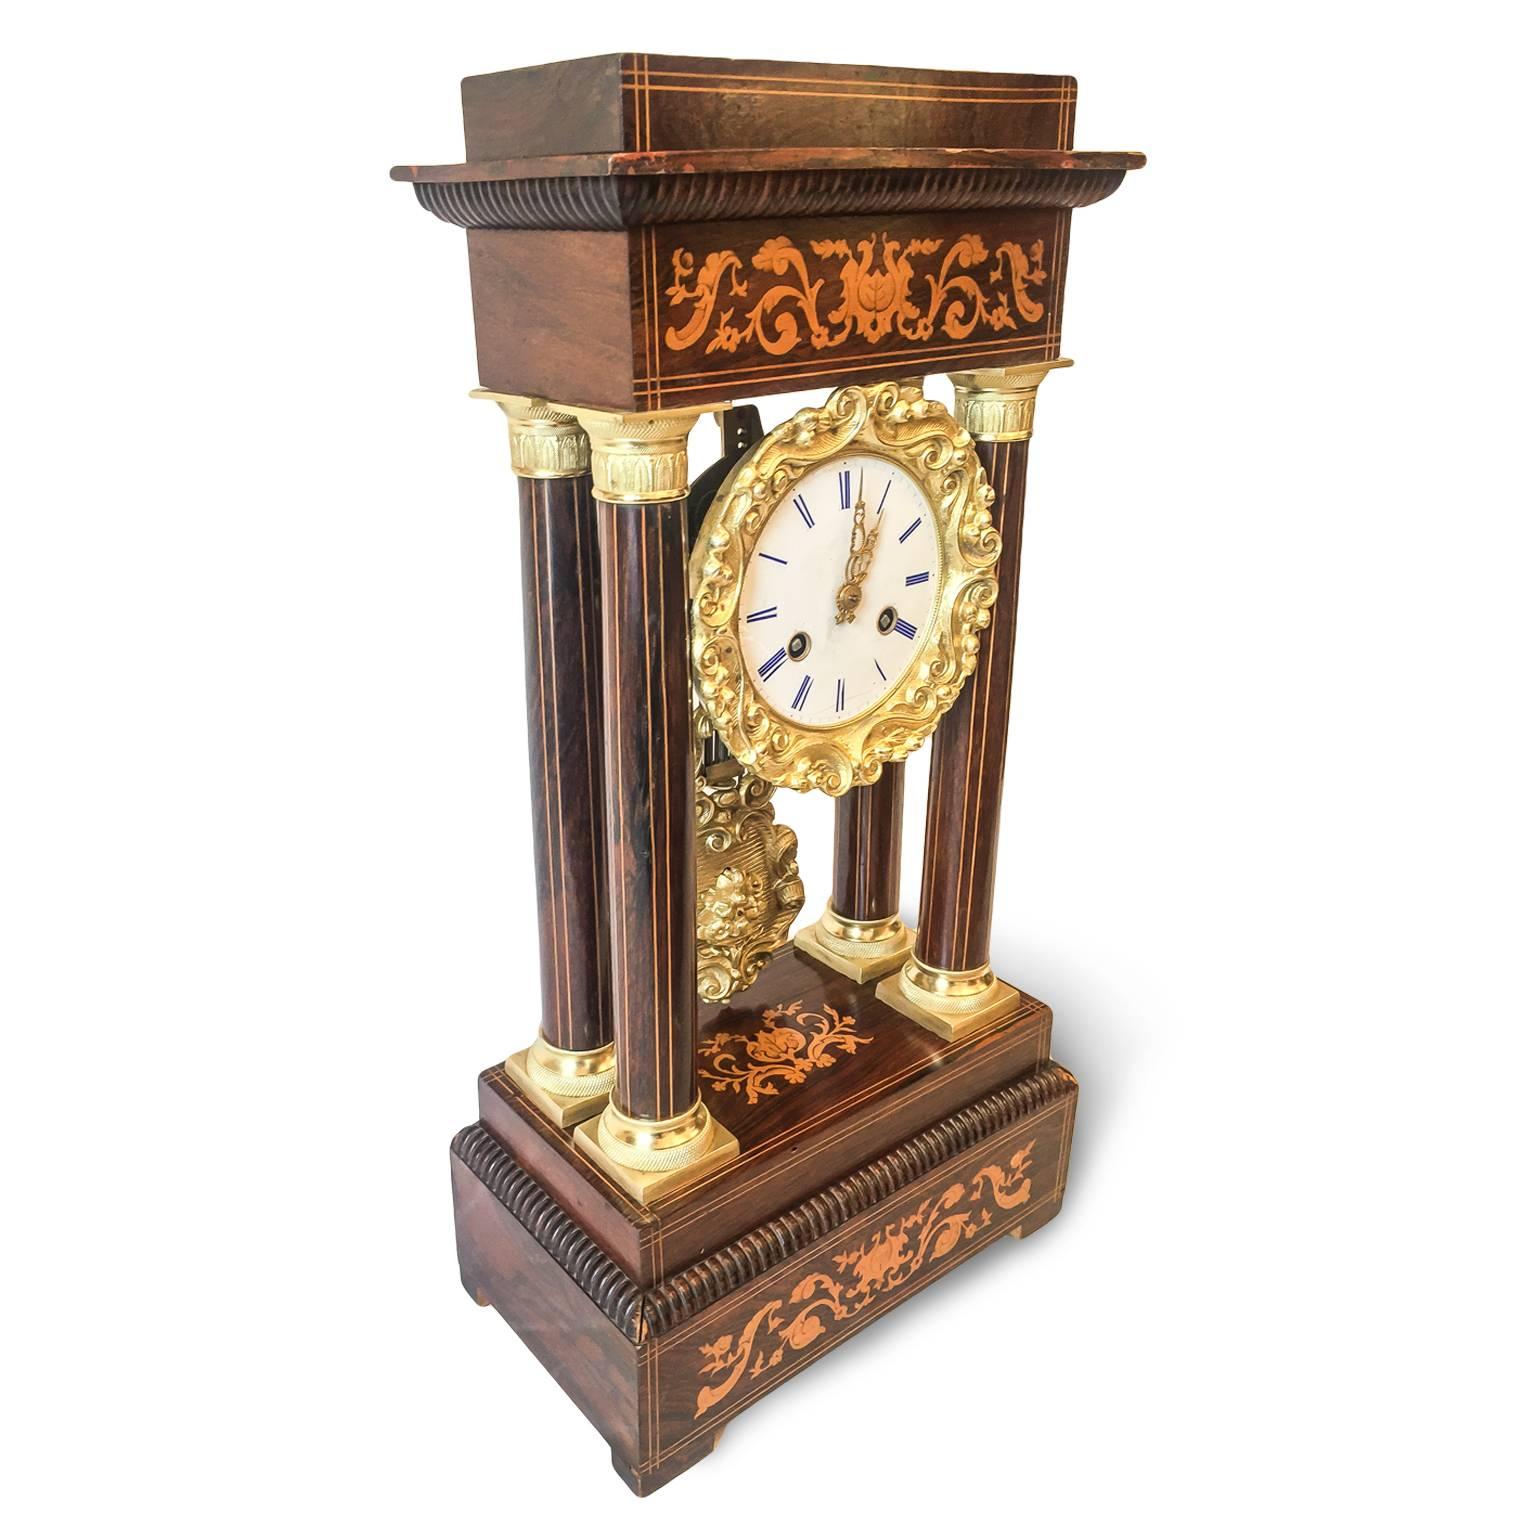 An elegant tall table, mantel clock, it's a French work with inlaid vegetal and geometric details and gilded bronze elements.
It dates back to the Napoleon III period, circa 1870, of French origin.
The wooden case has delicate scrolling medallions